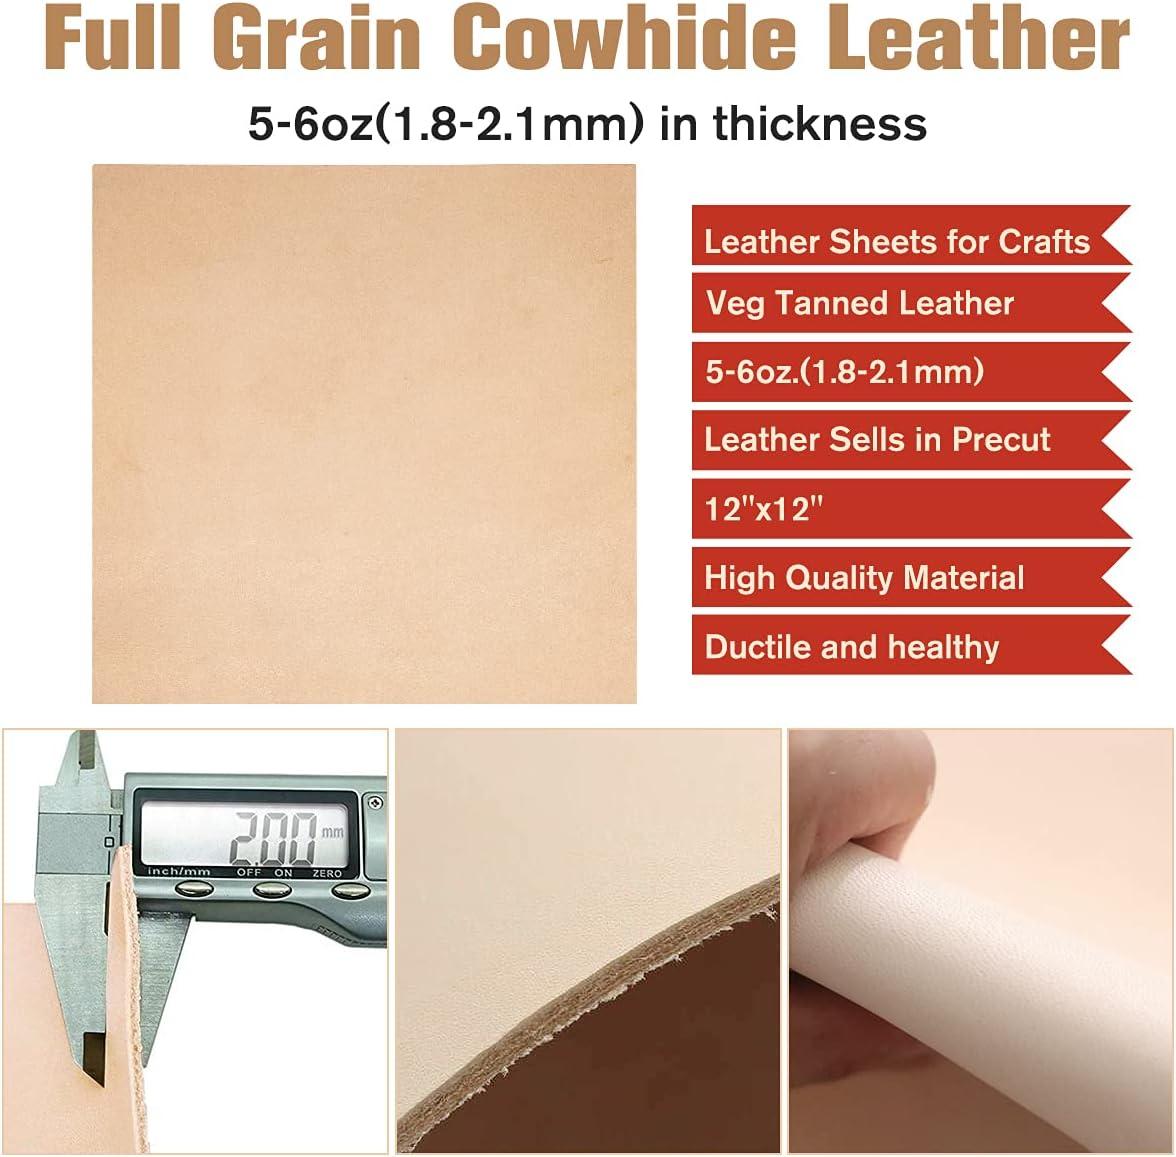 Thick Leather Sheets for Crafts Tooling Leather Square Veg Tan Leather  1.8-2.1mm Full Grain Leather Pieces Genuine Cowhide Leather for Crafts  Sewing Hobby Workshop 12x12 Veg tanned 12x12